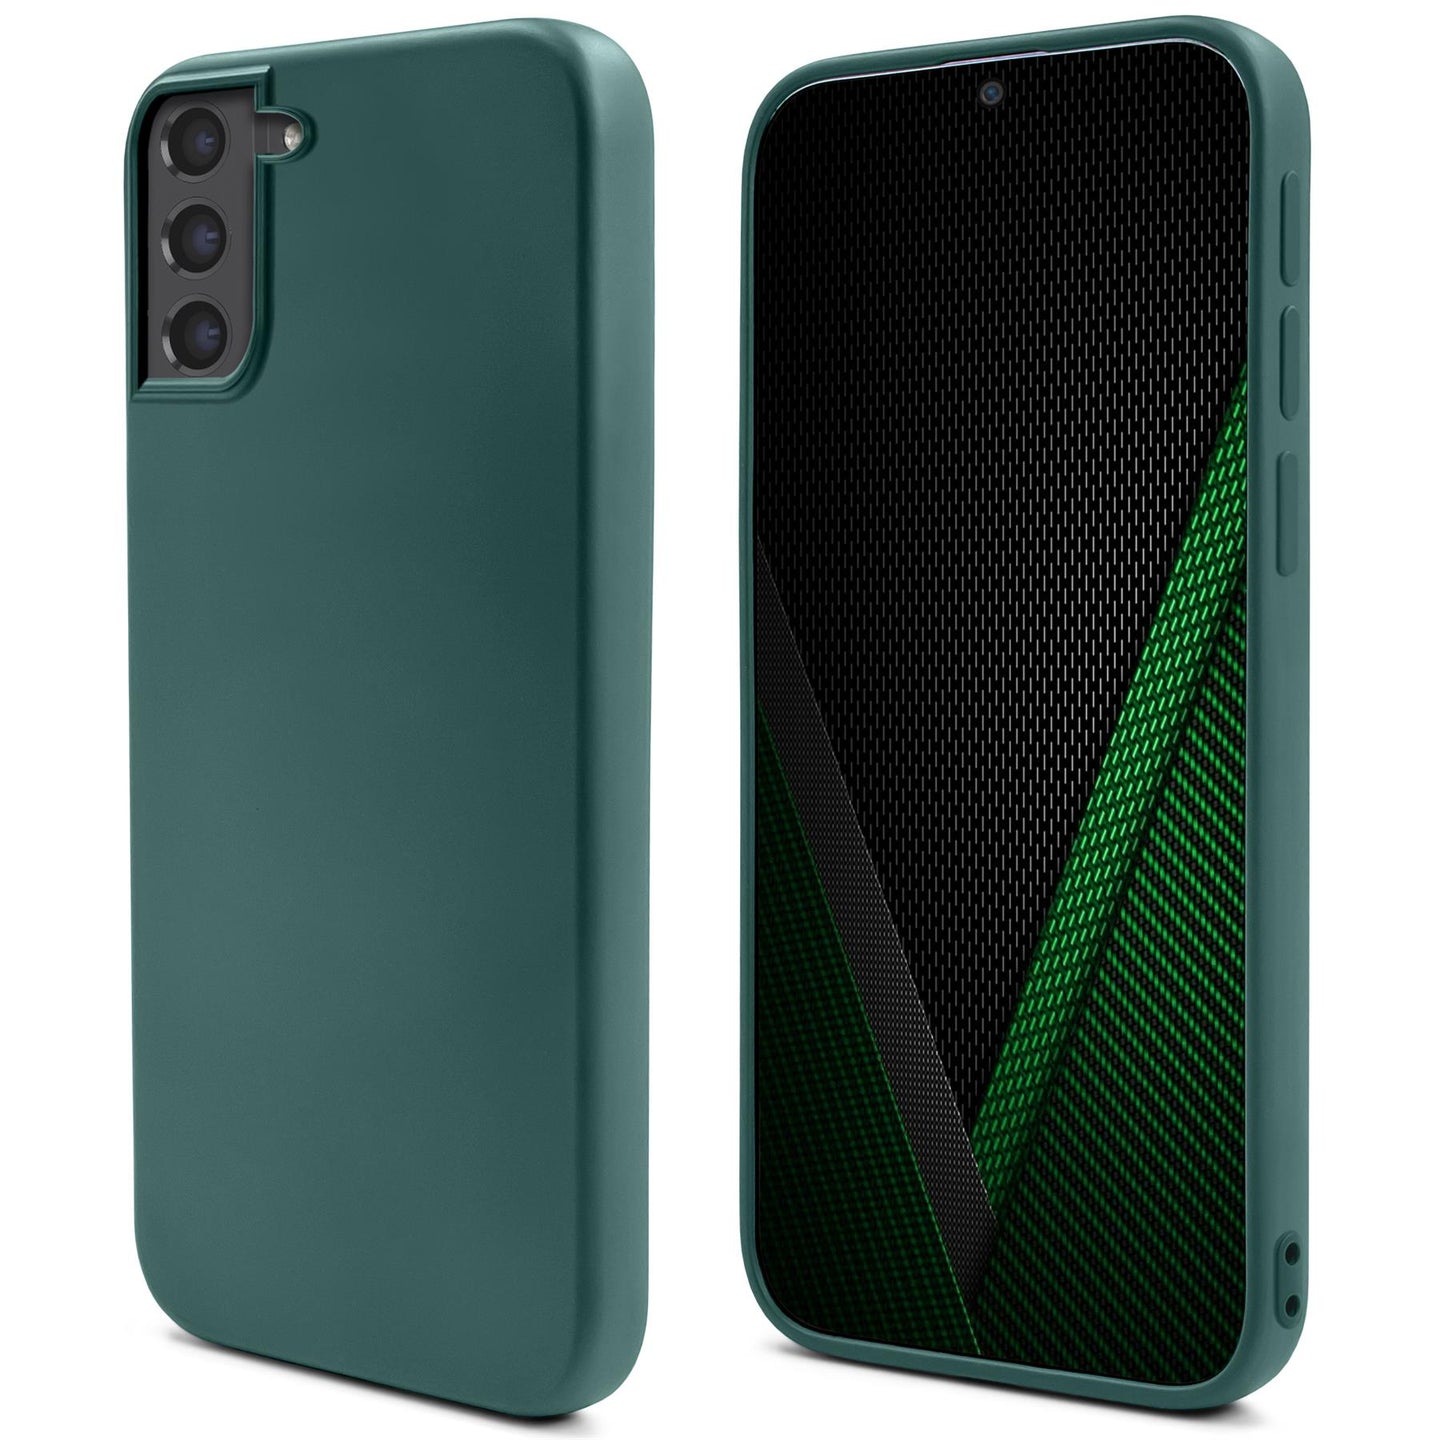 Moozy Lifestyle. Silicone Case for Samsung S21 FE, Dark Green - Liquid Silicone Lightweight Cover with Matte Finish and Soft Microfiber Lining, Premium Silicone Case